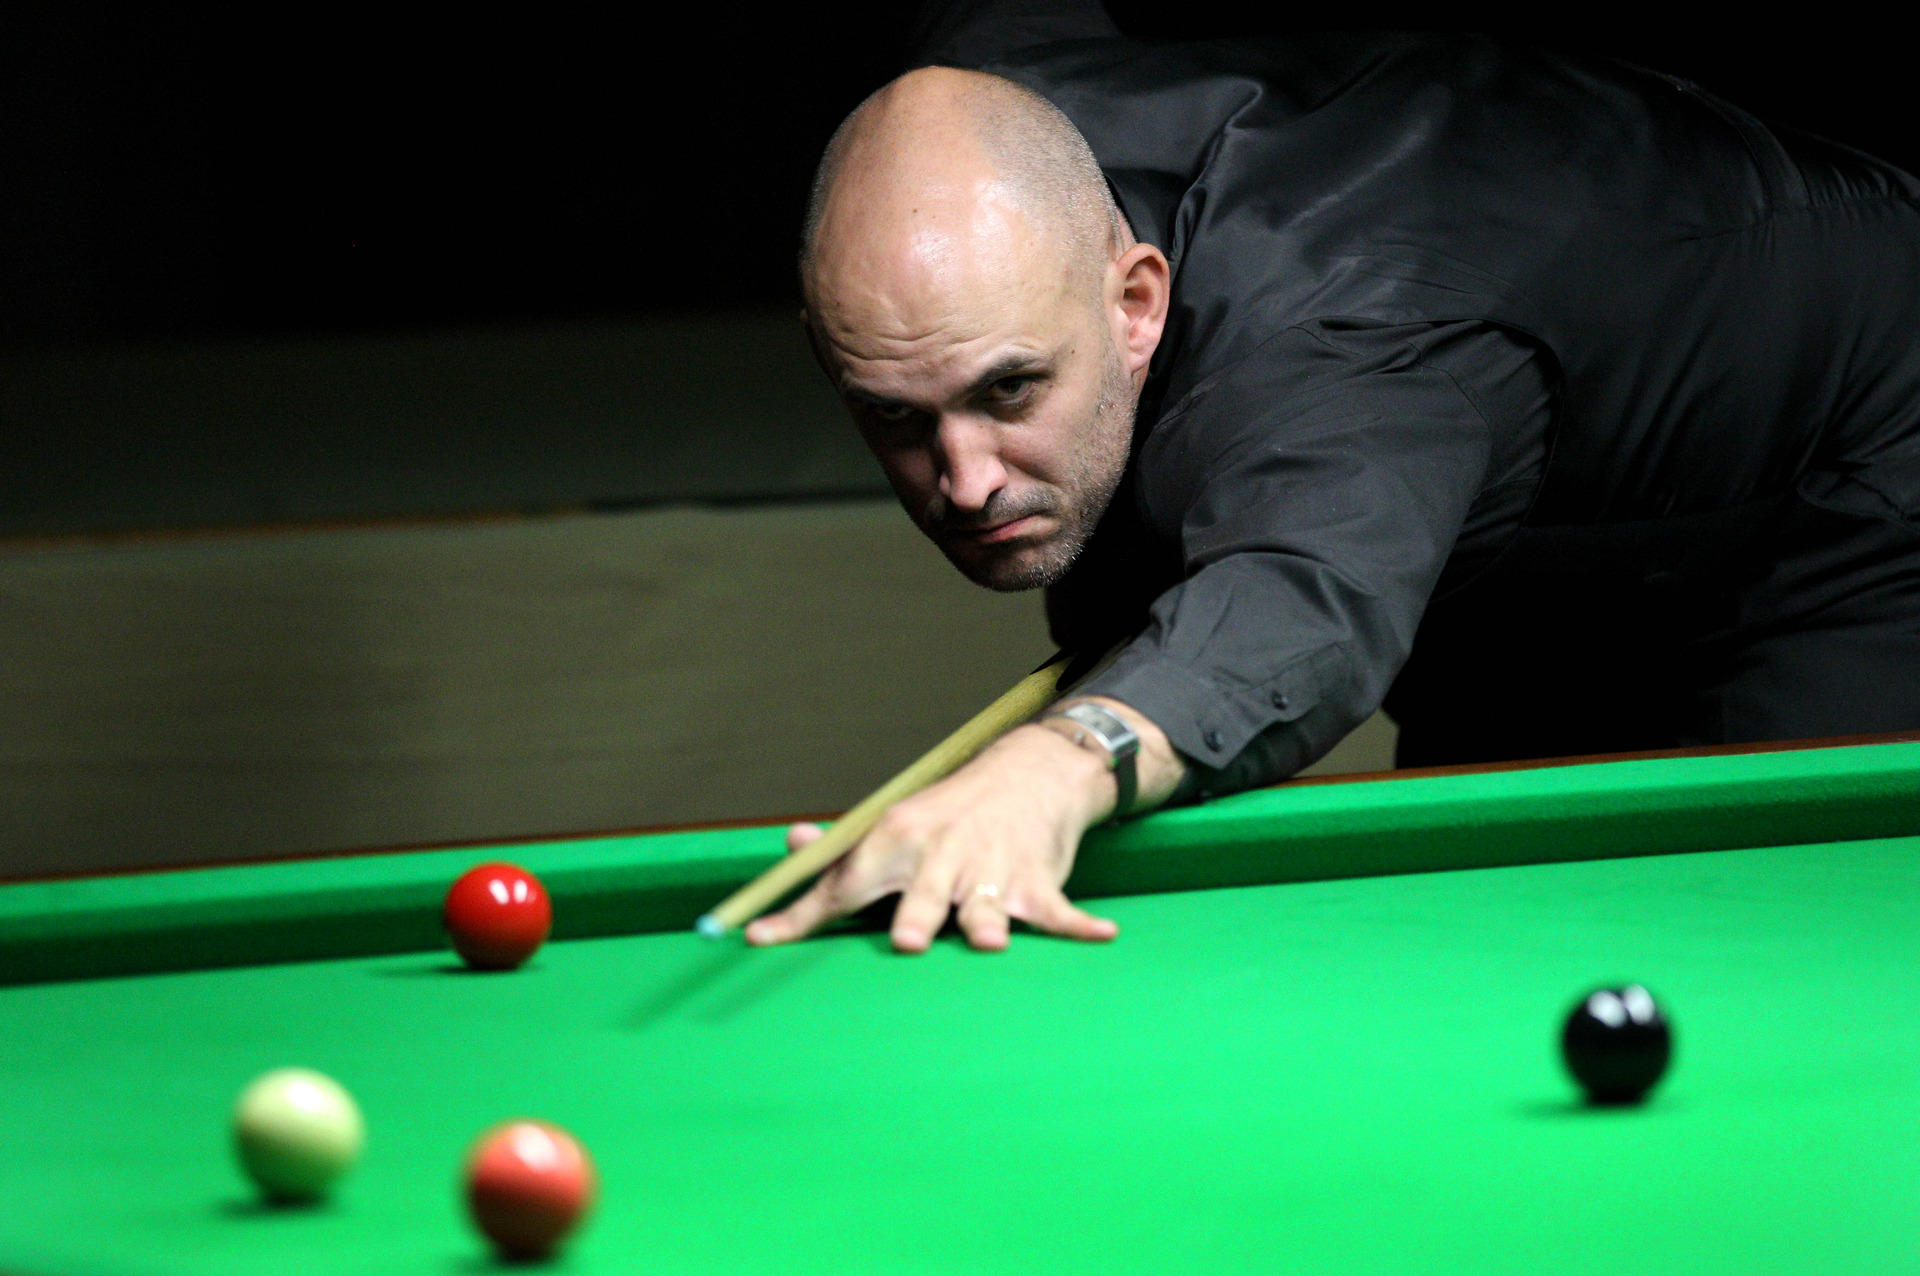 Snooker Bays Jackson wins Oceania title and books world champs spot